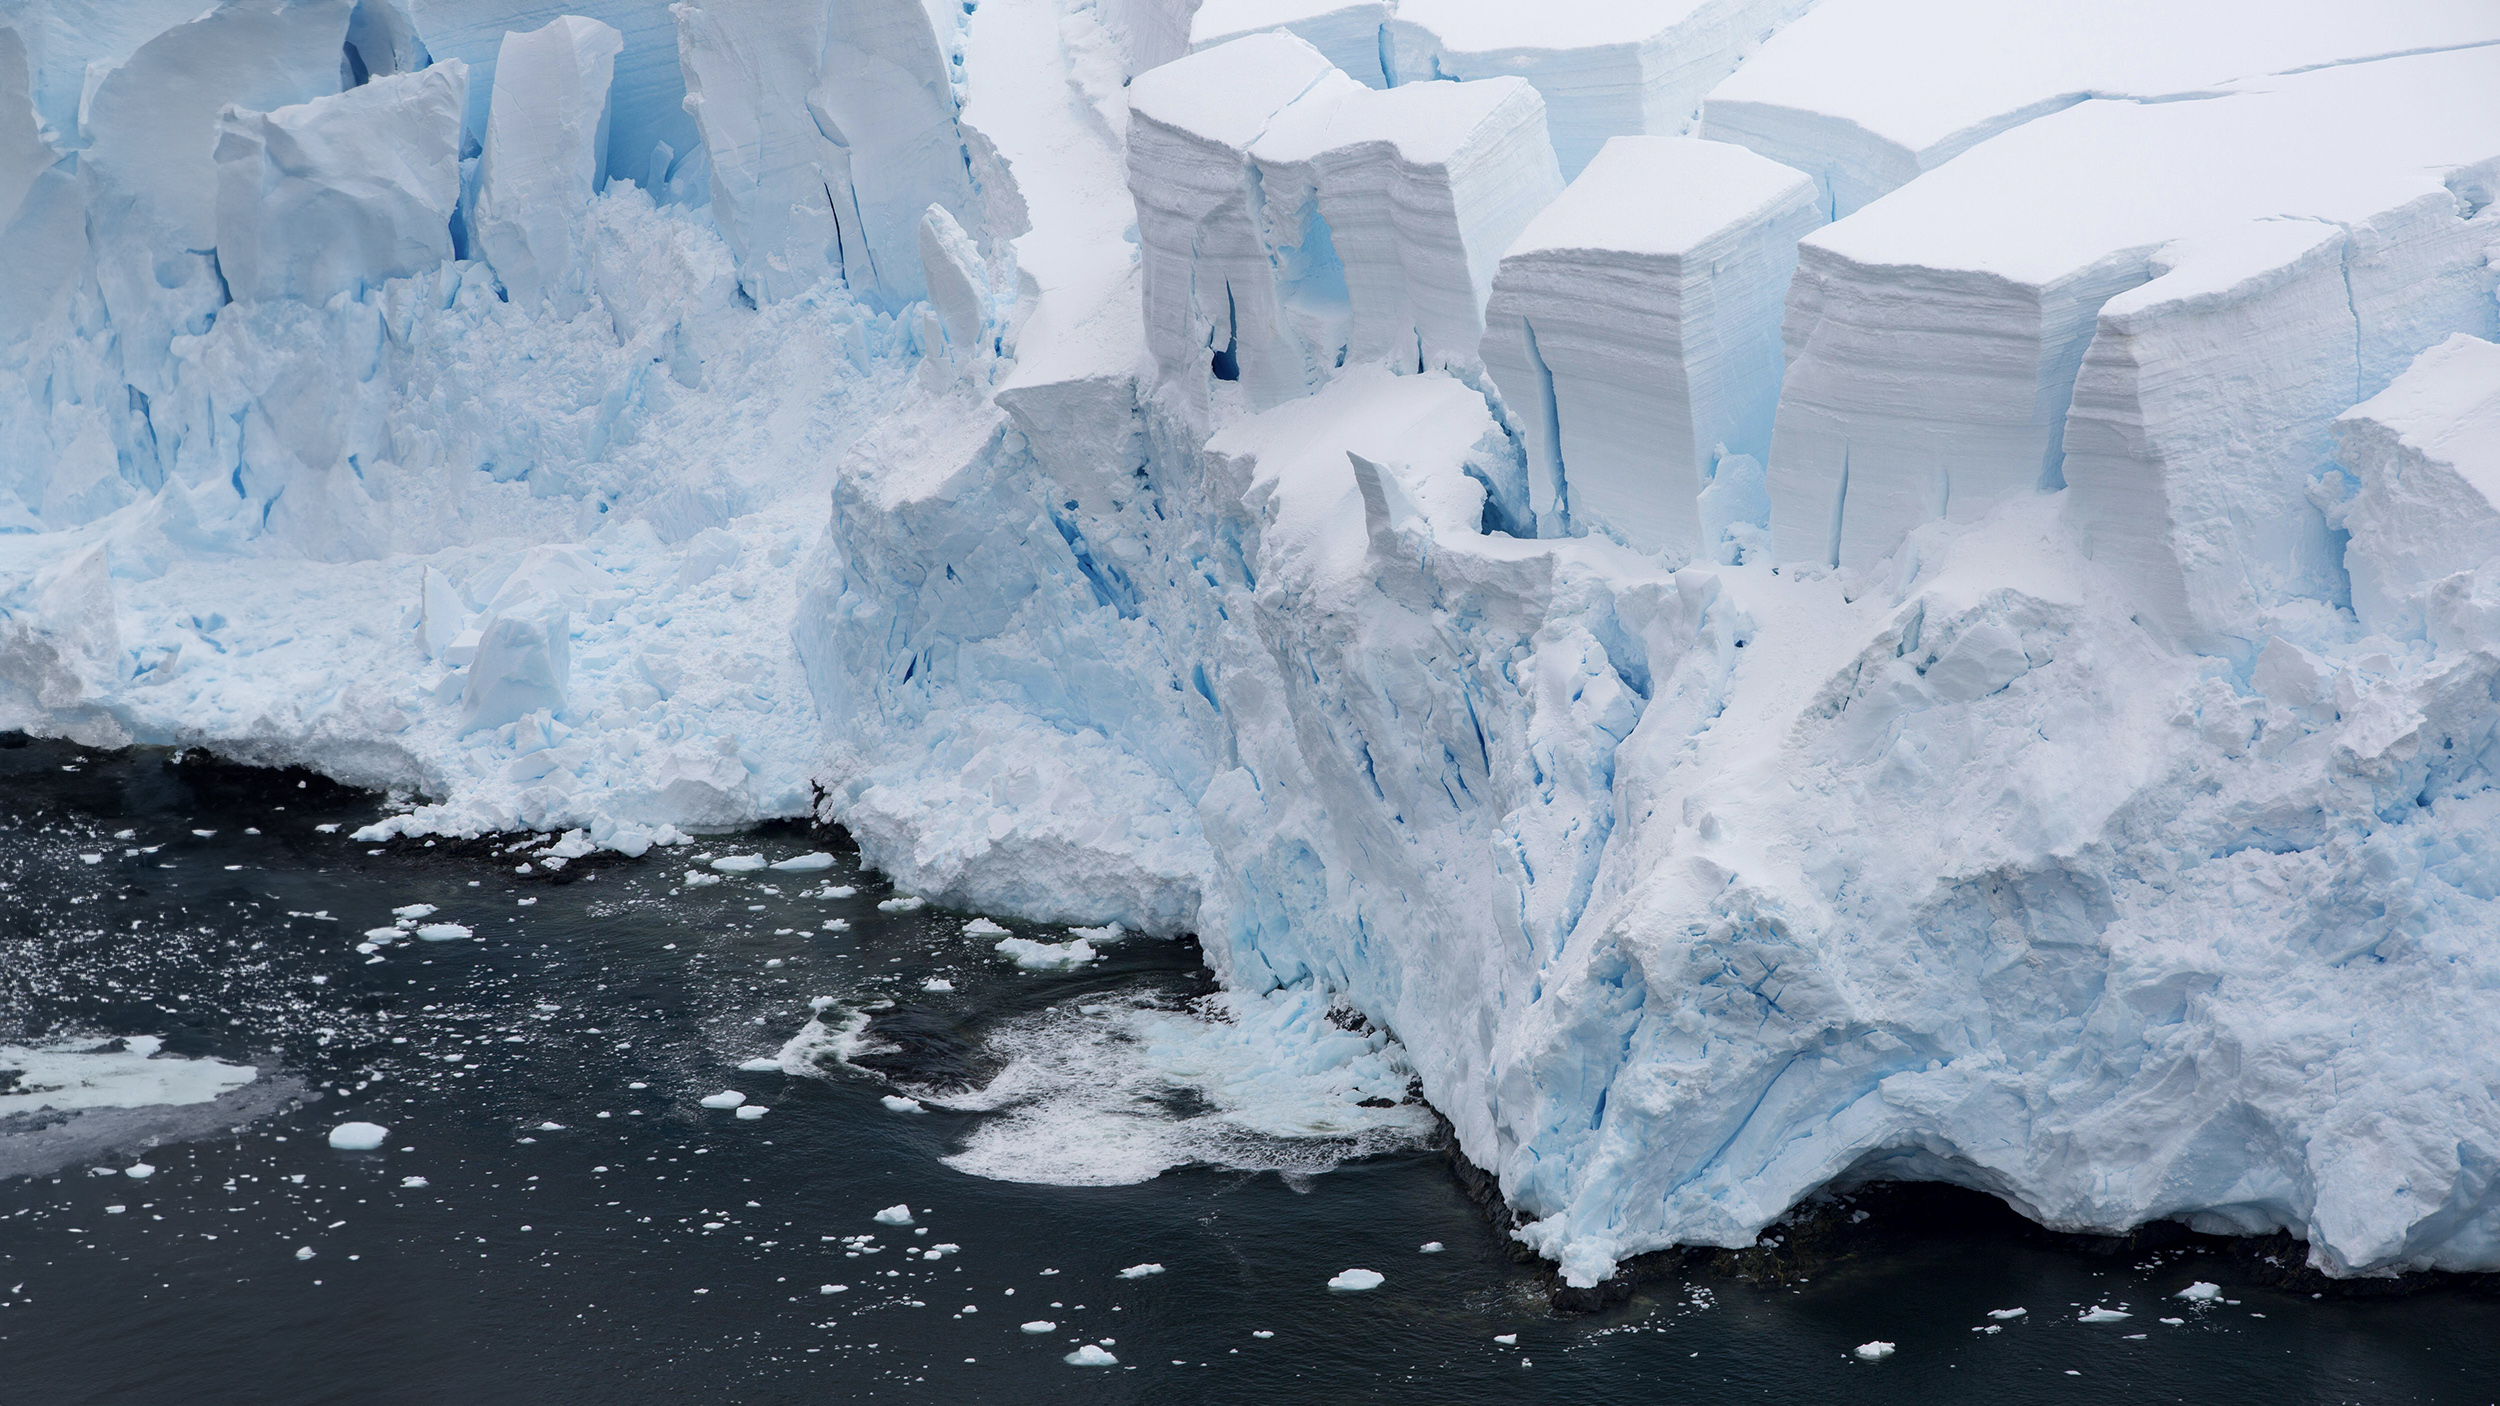 An aerial view of an iceberg in antarctica.